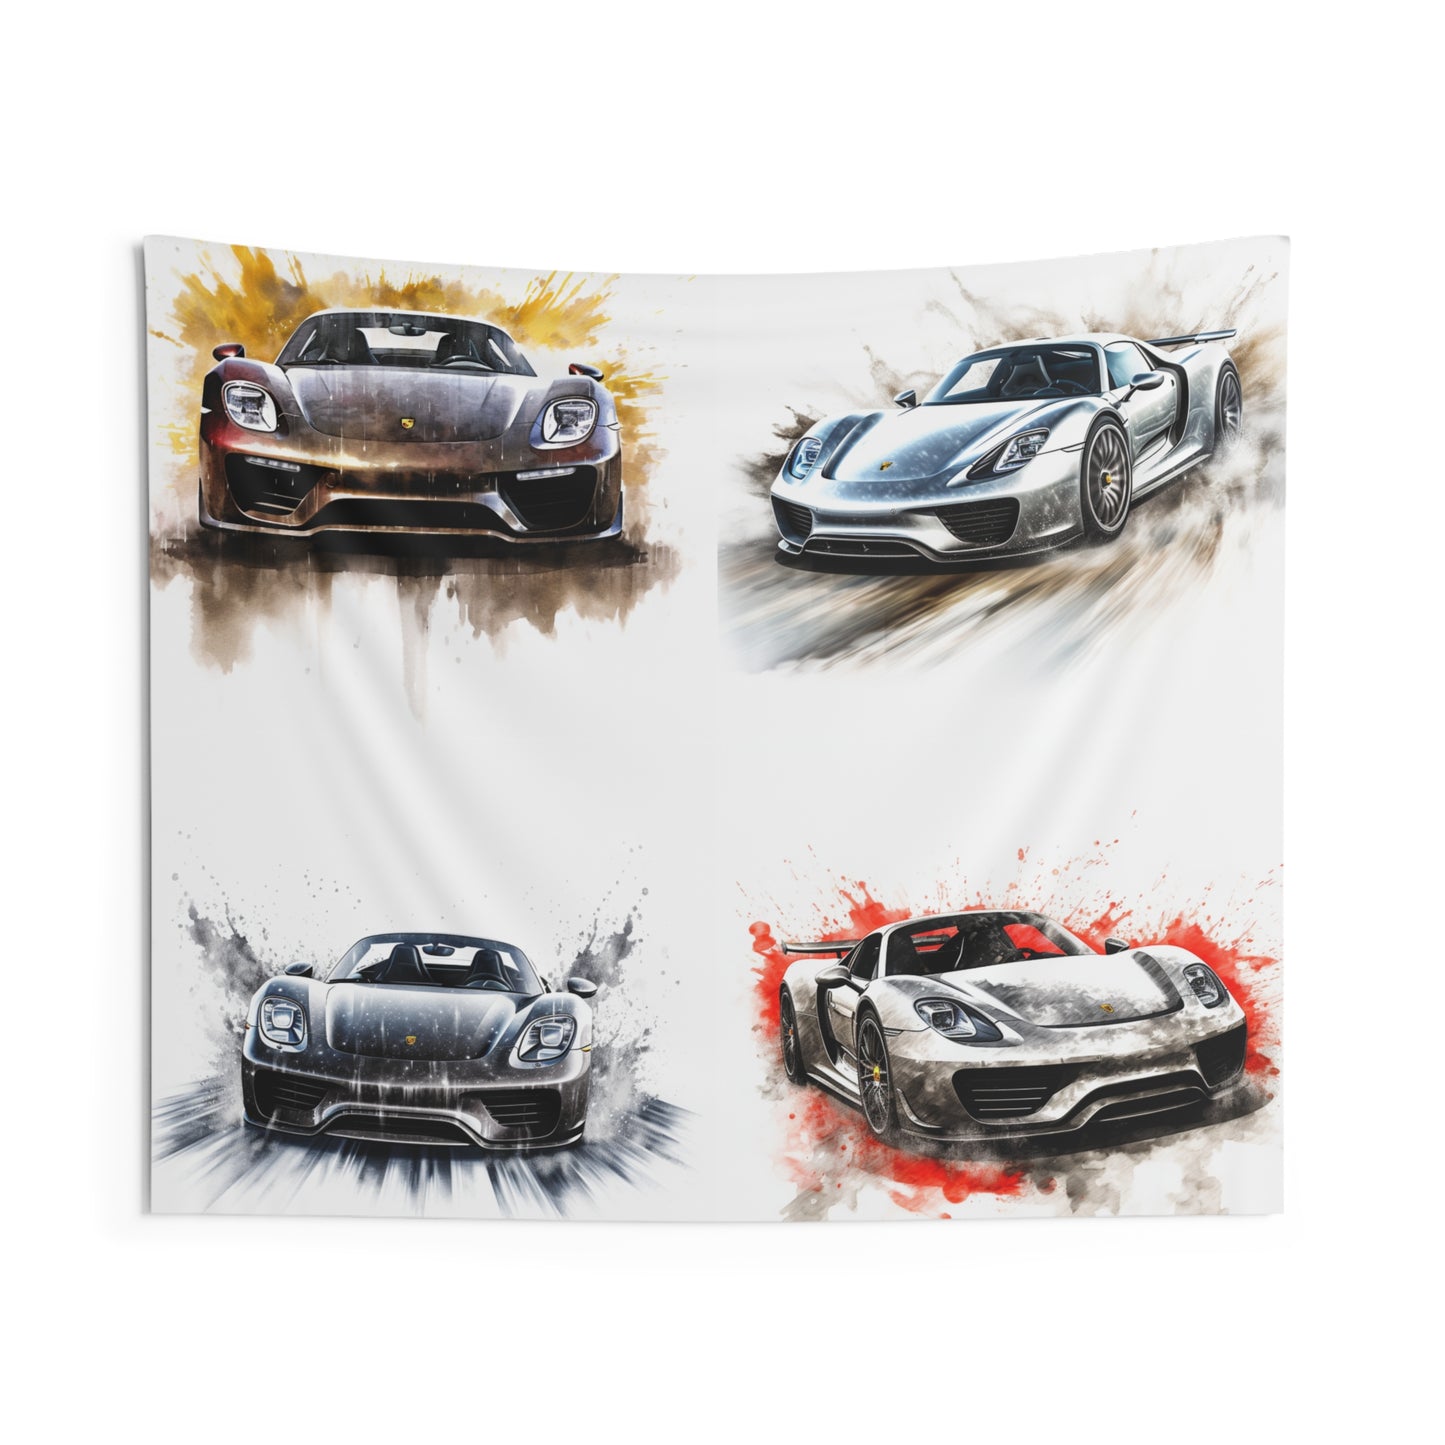 Indoor Wall Tapestries 918 Spyder white background driving fast with water splashing 5